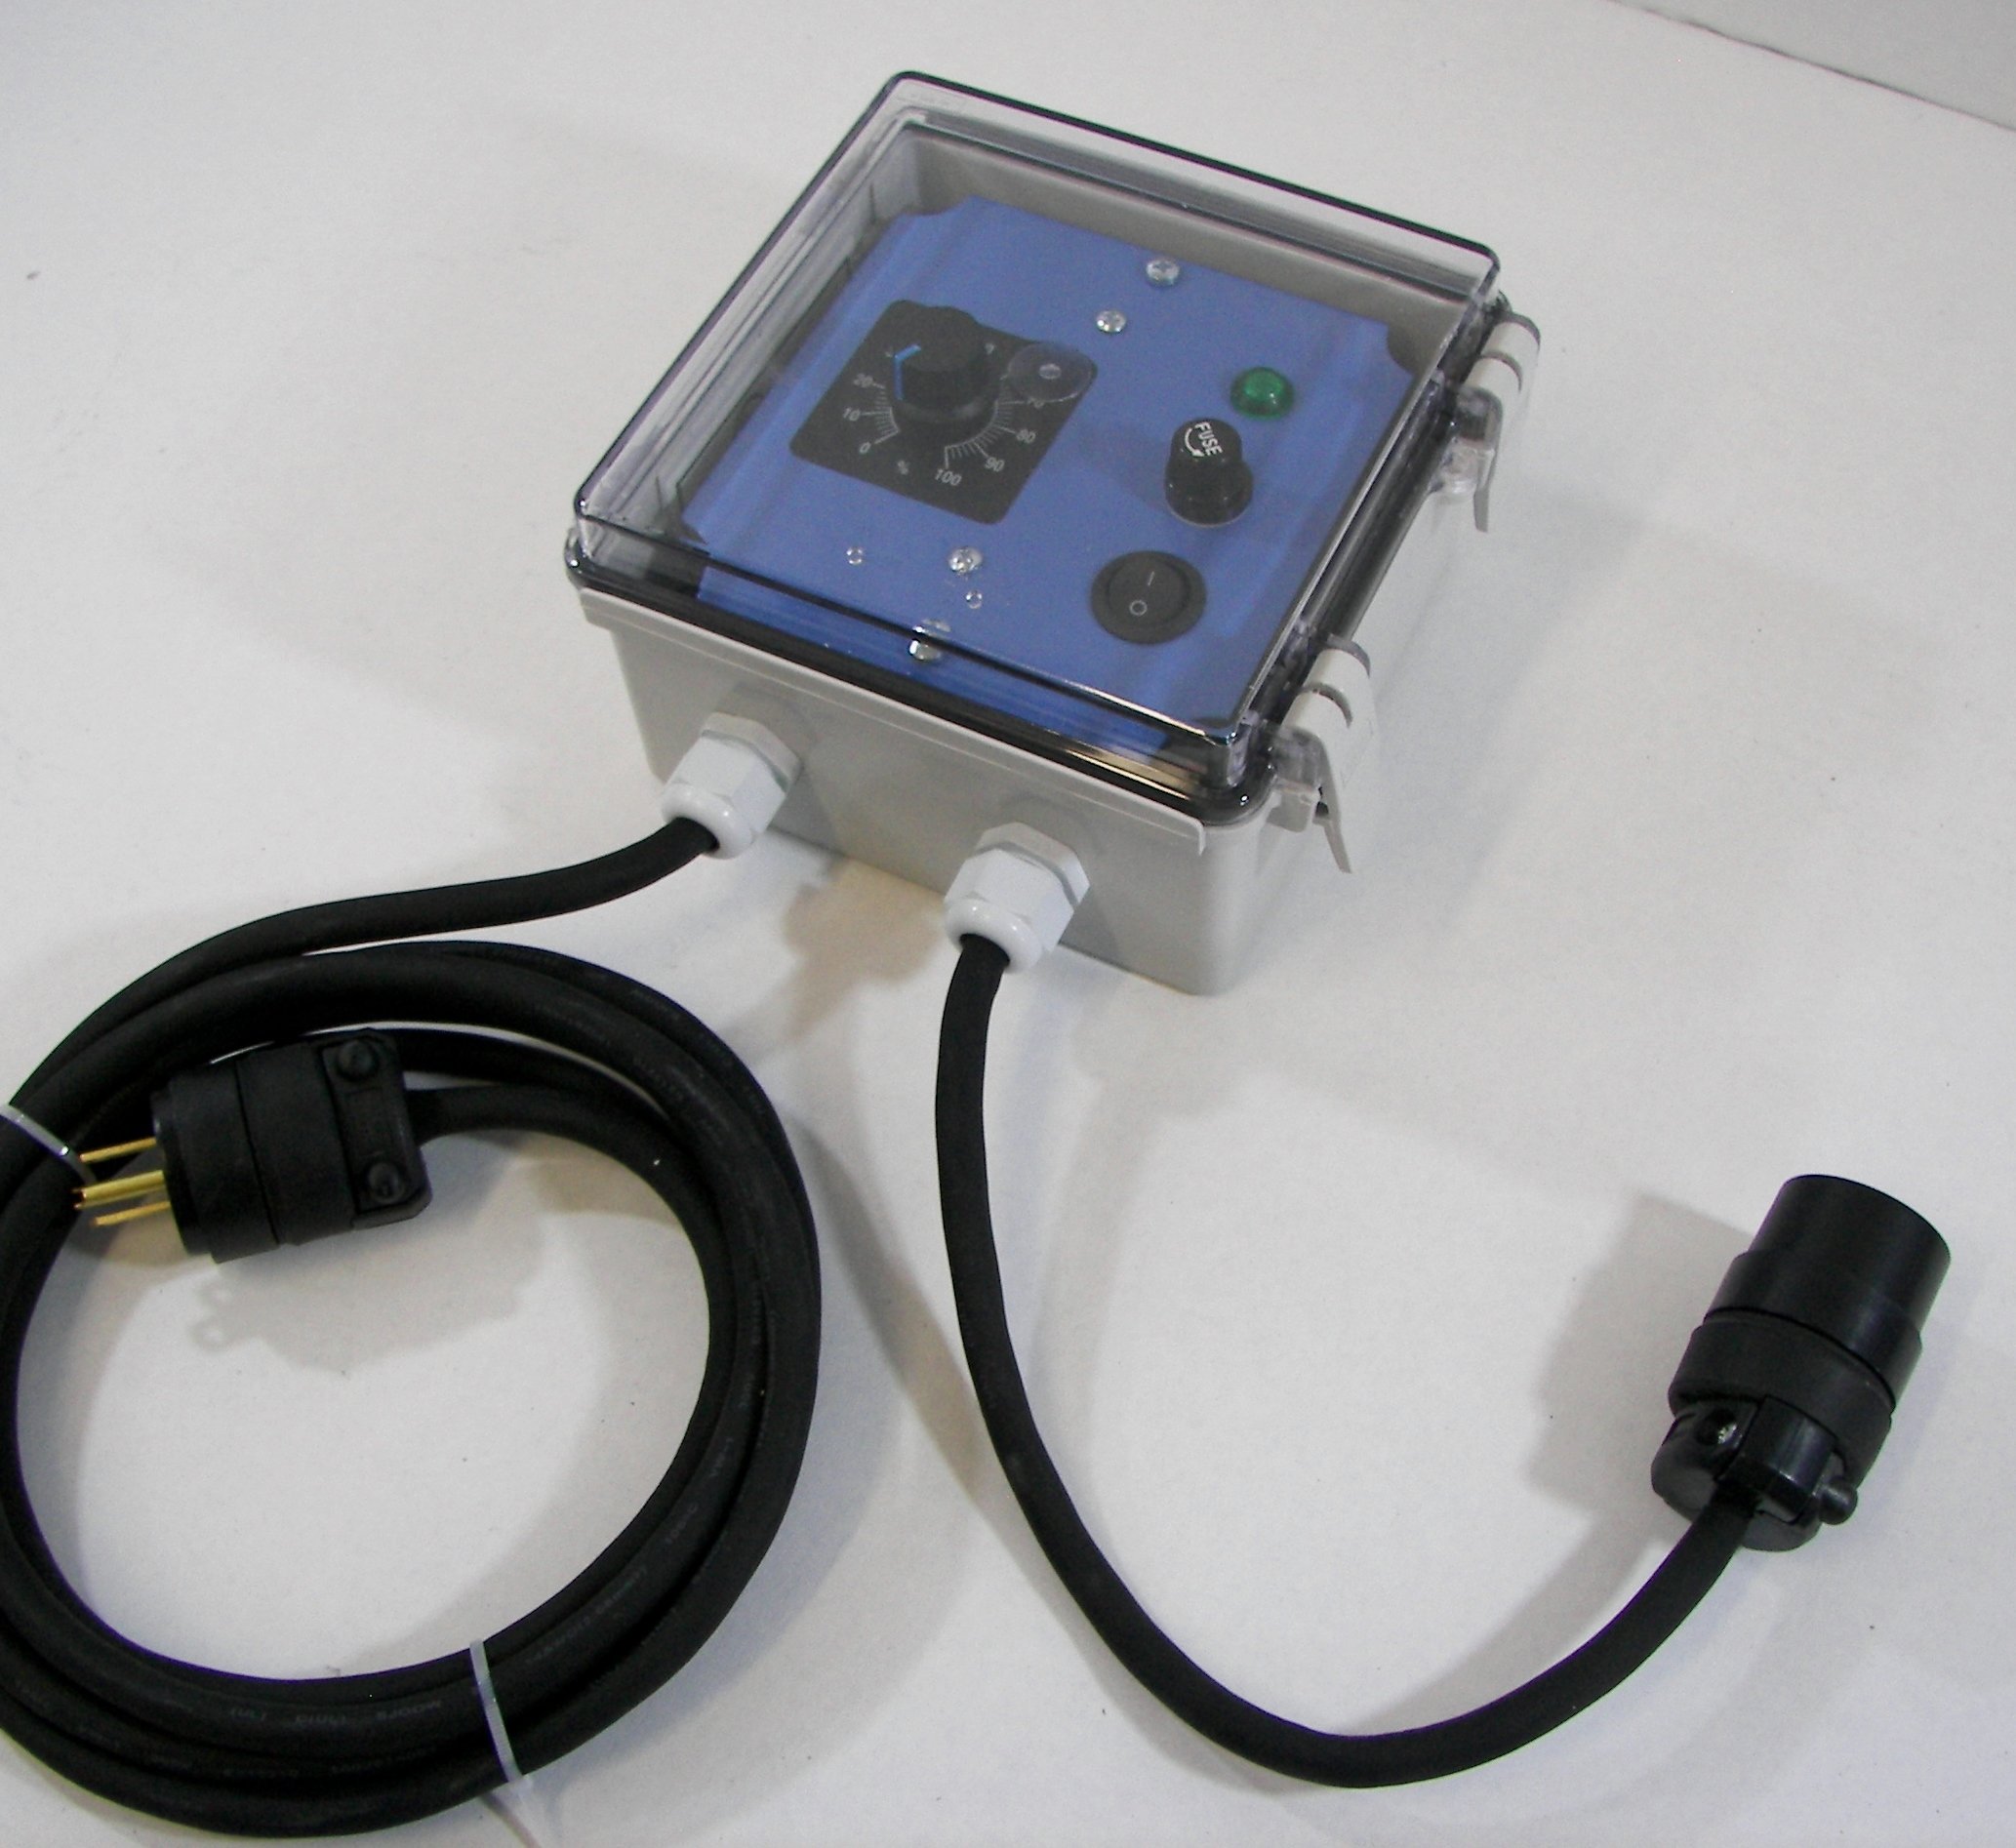 Benchtop Thermocouple Temperature Meter